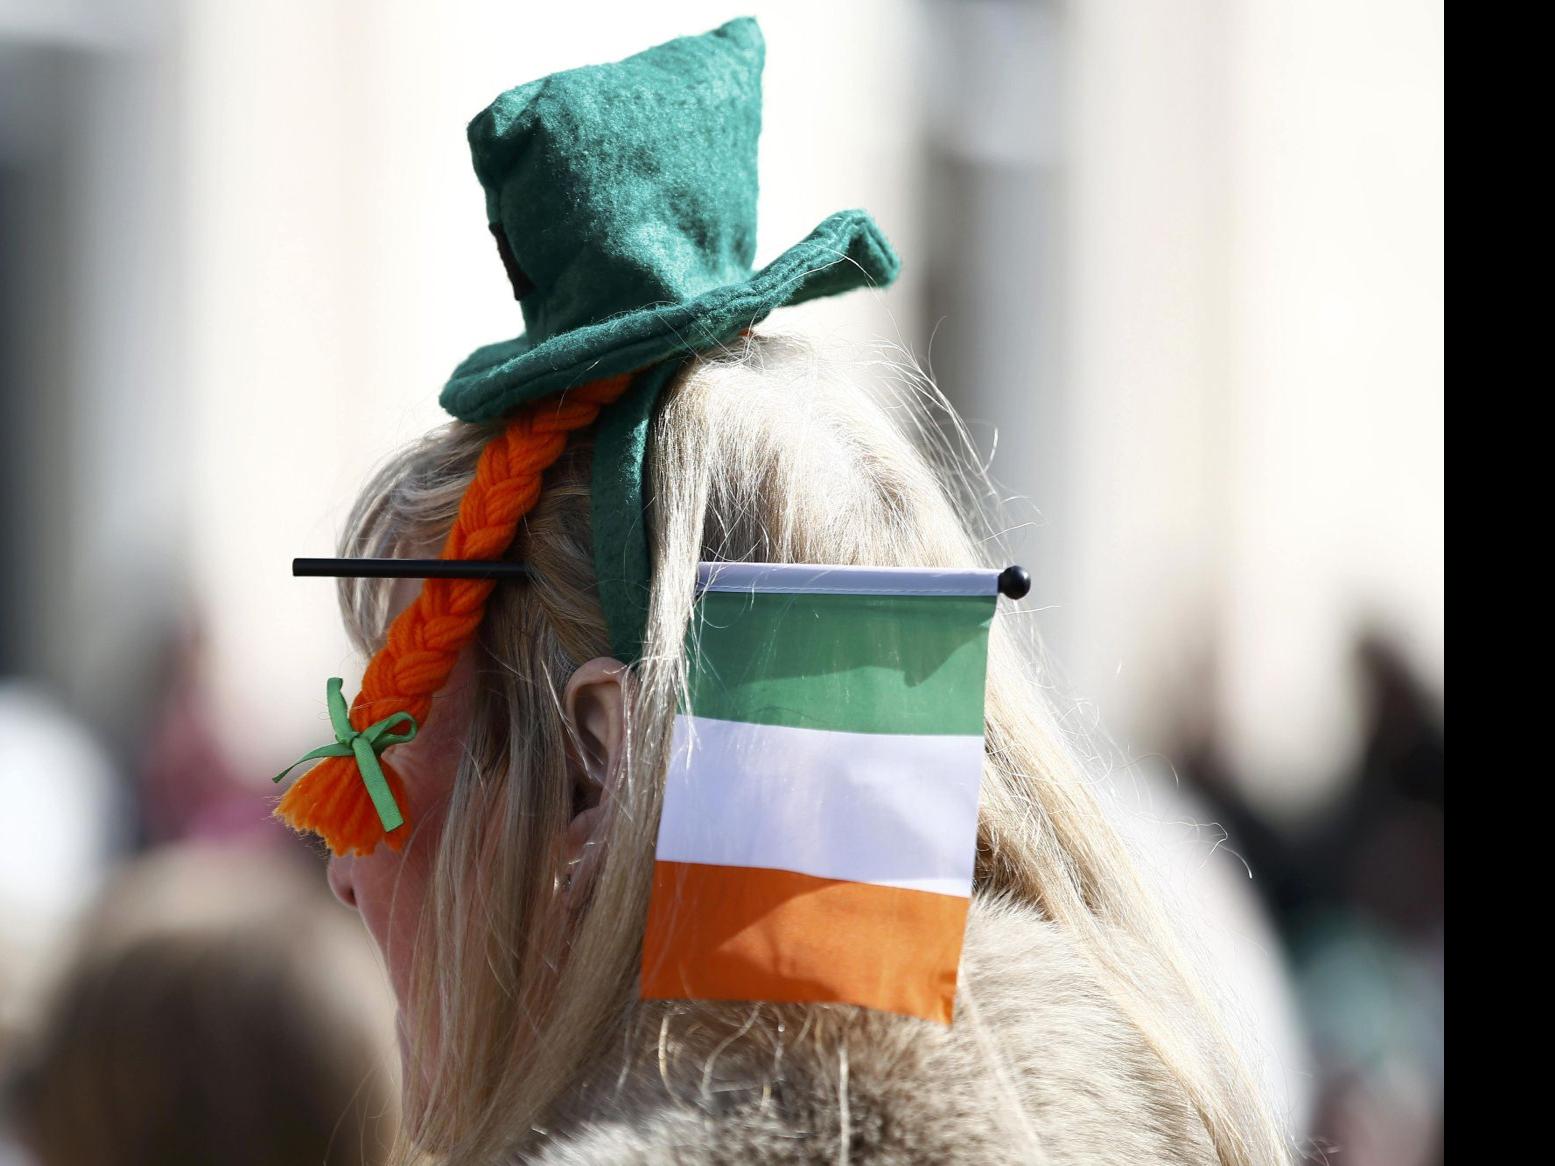 Why do people wear green on St. Patrick's Day?